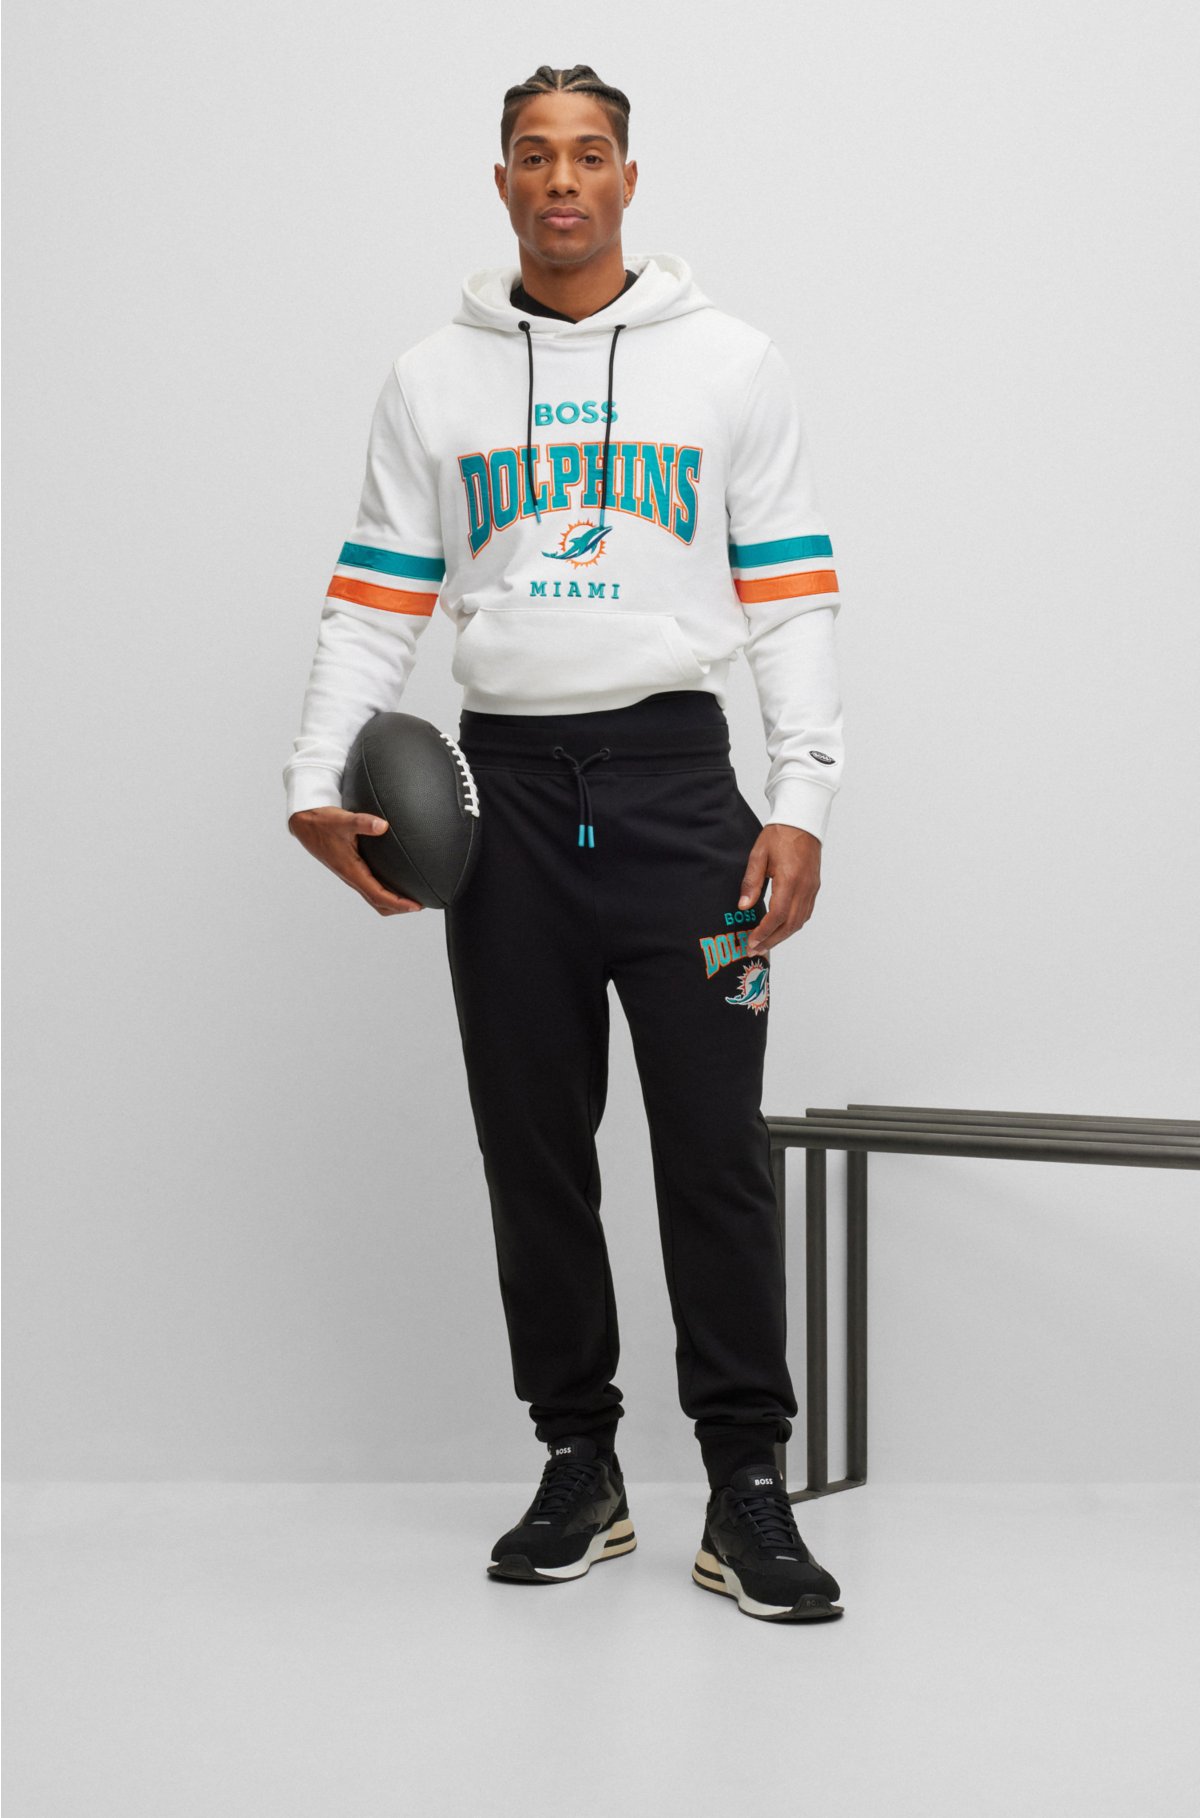 BOSS x NFL cotton-terry hoodie with collaborative branding, Dolphins